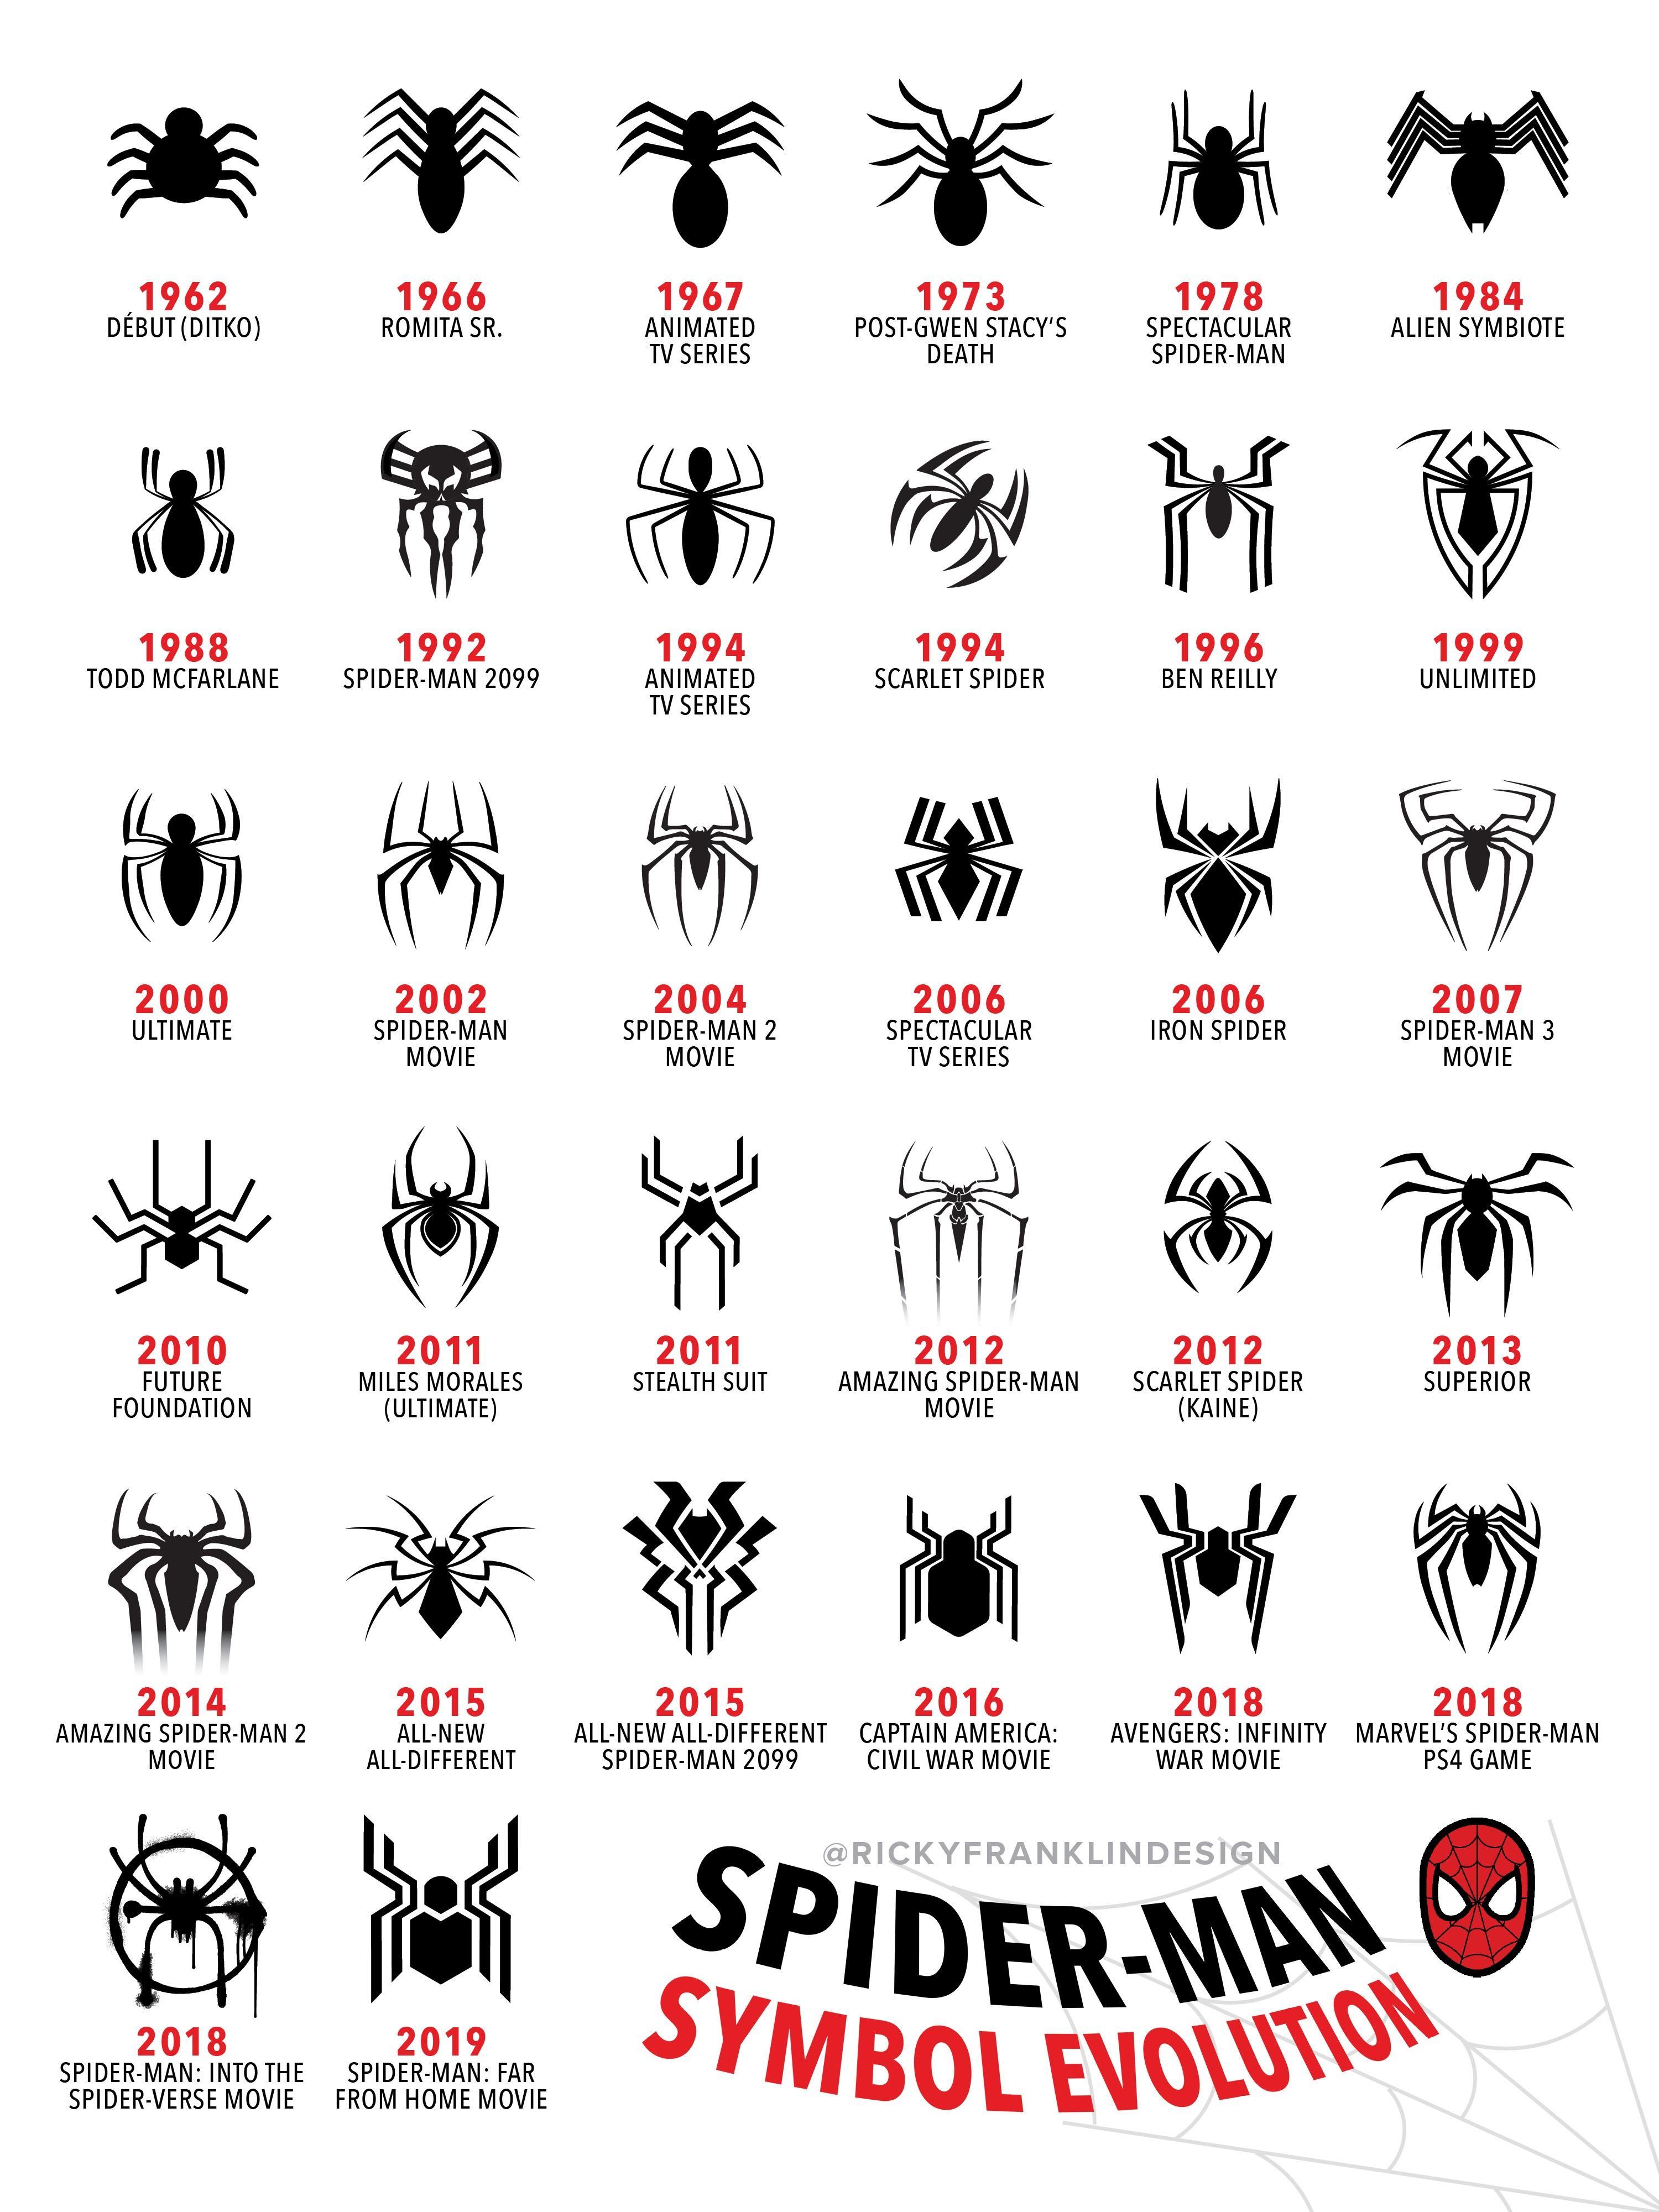 Symbiote Logo - An infographic I made celebrating the many iterations of Spider